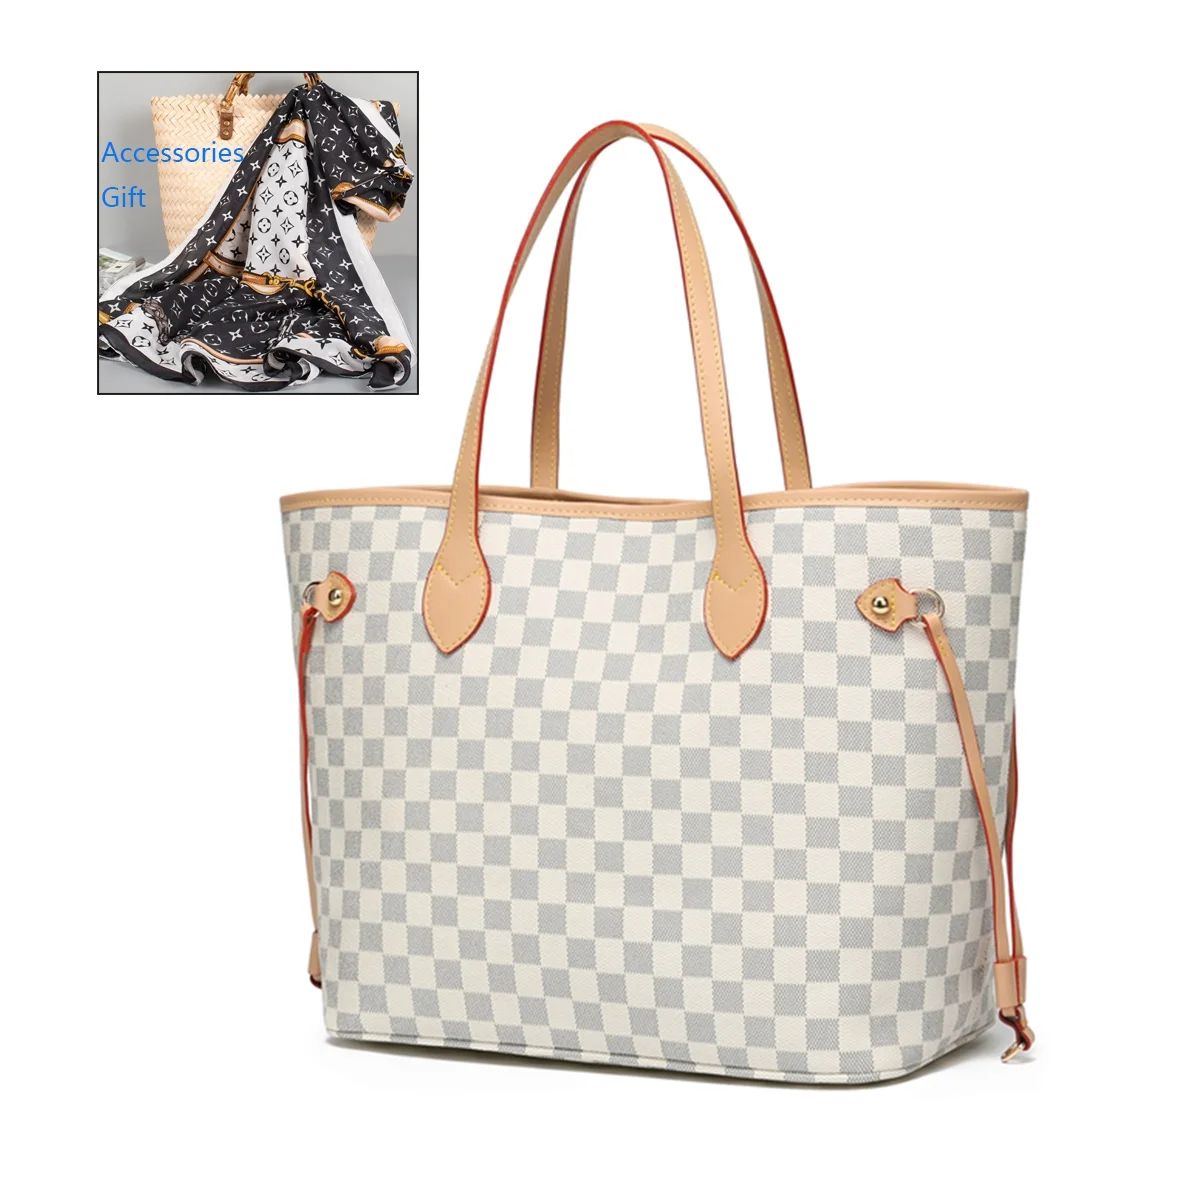 BUTIED Women Handbag Checkered Shoulder Bag Tote Fashion Casual Bag -Leather (White) Mother's Day... | Walmart (US)